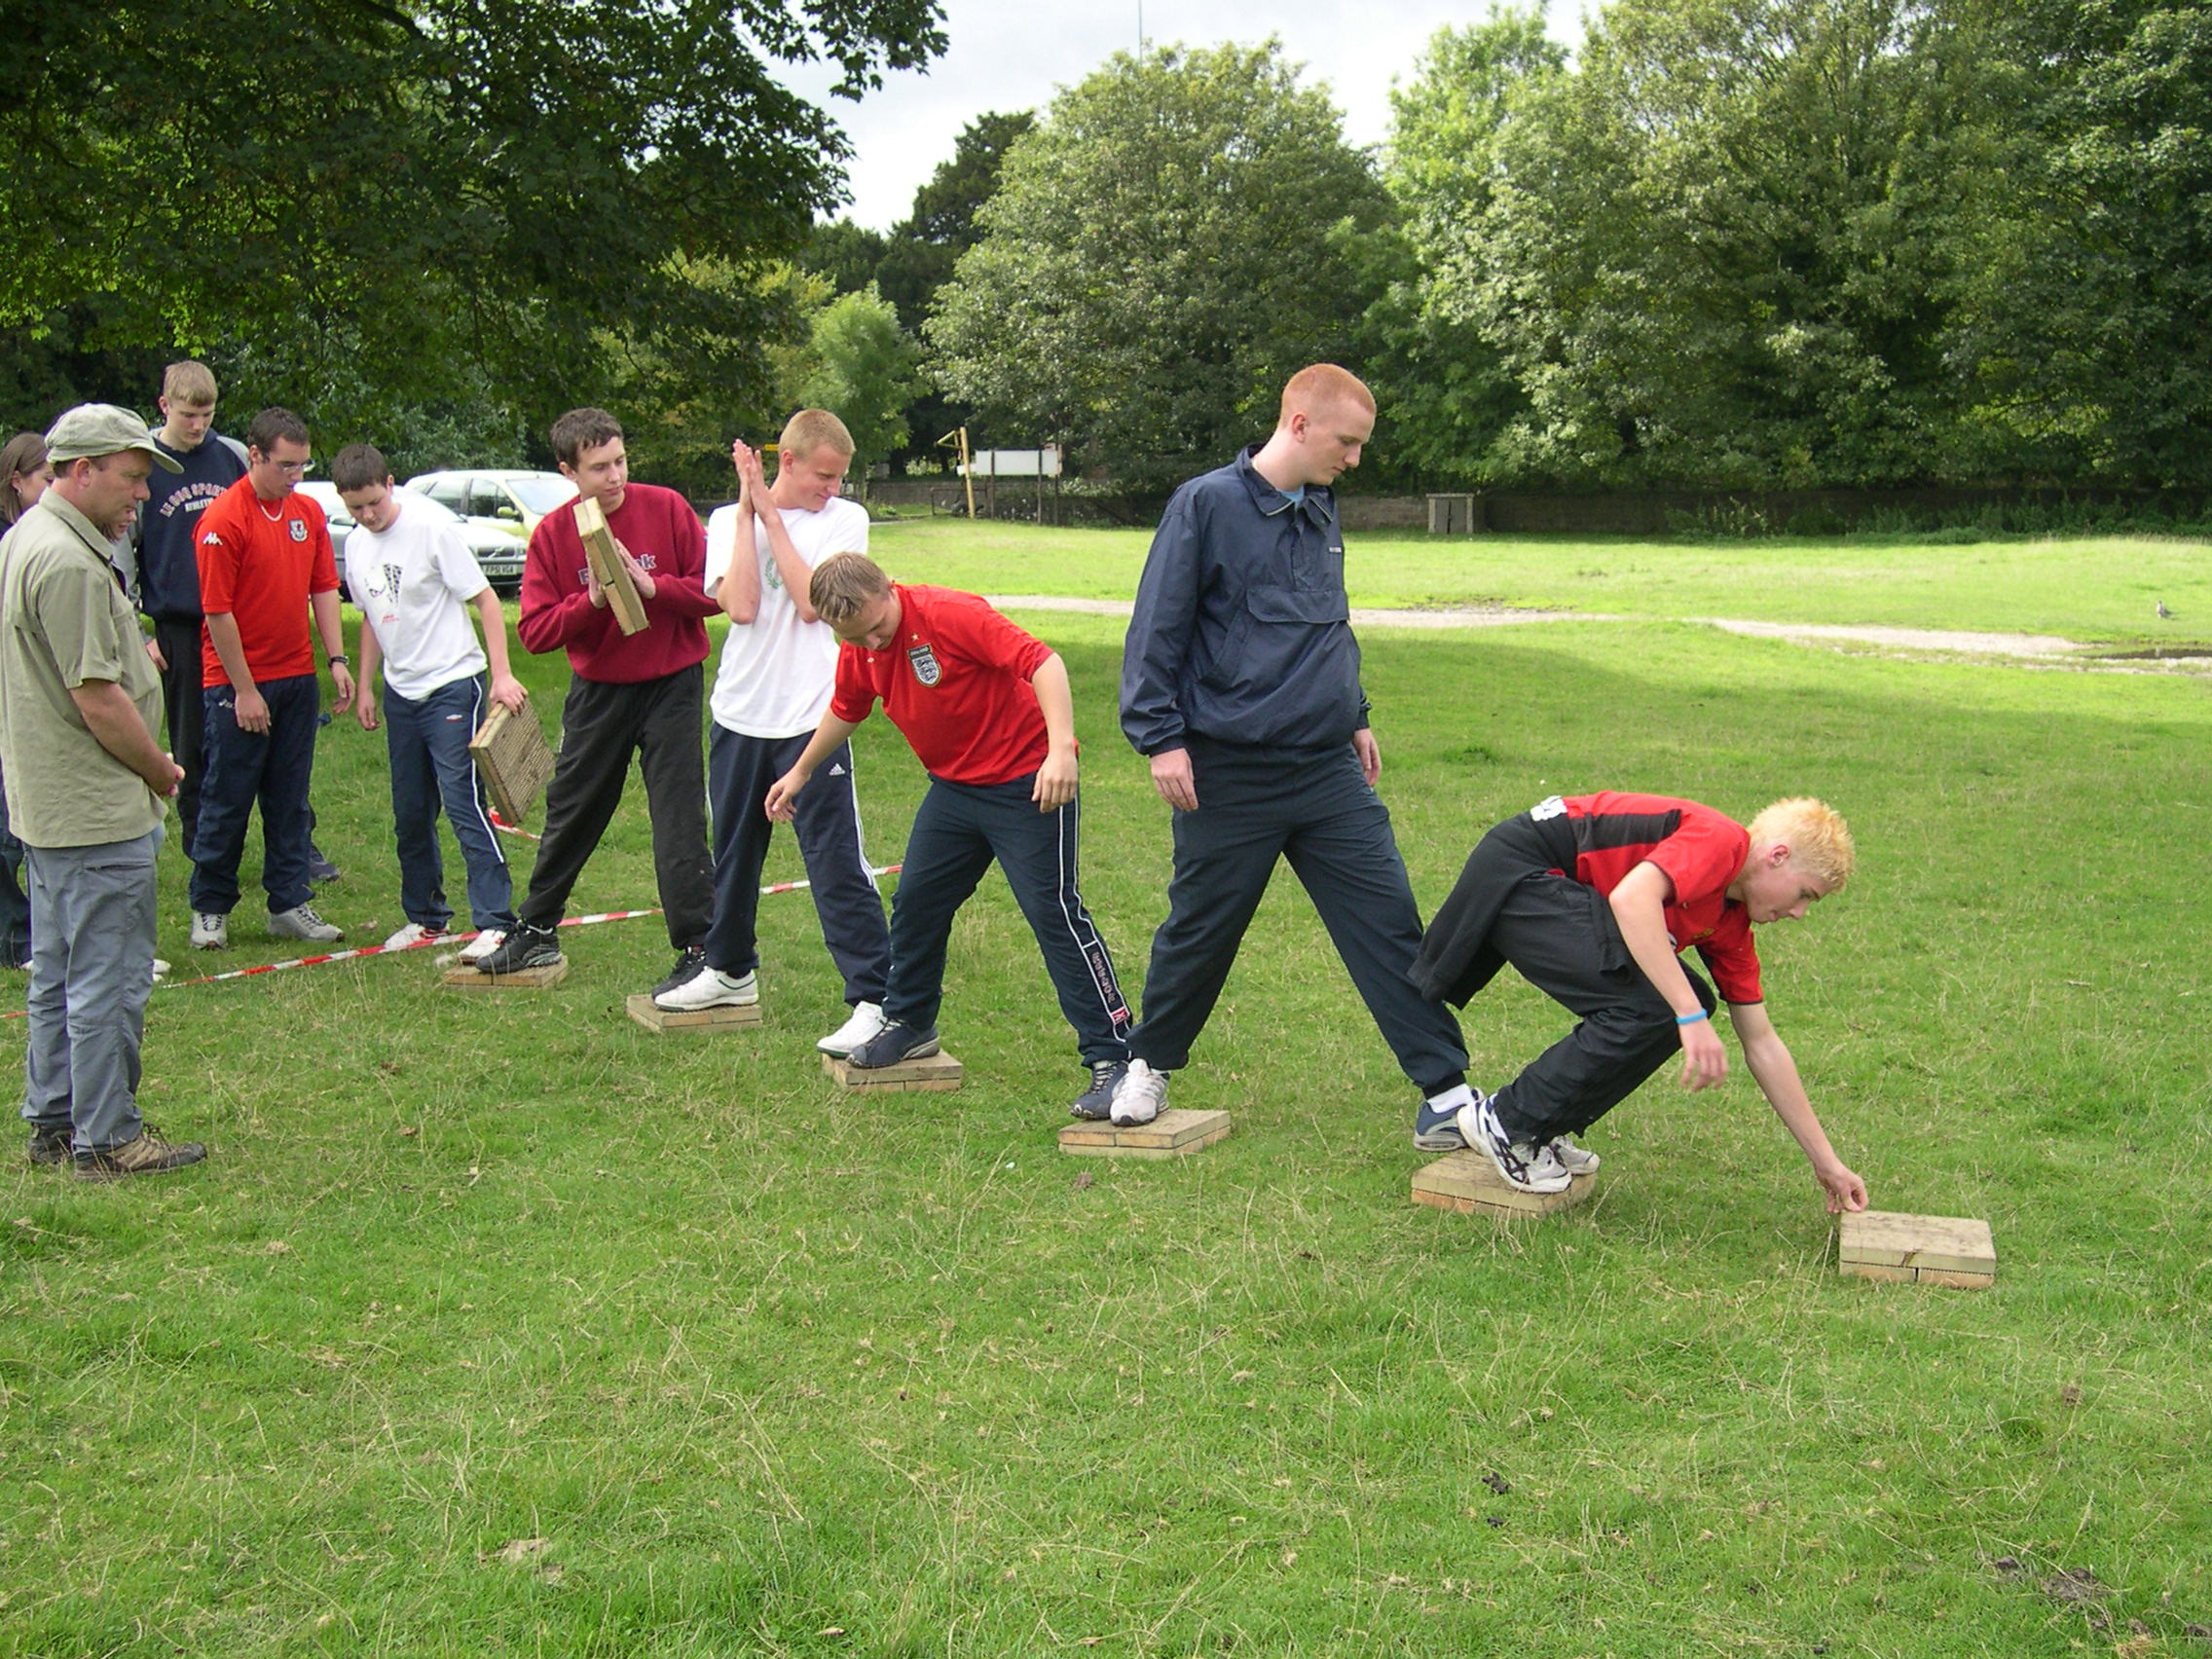 Points To Consider Before Organize Team Building Activities